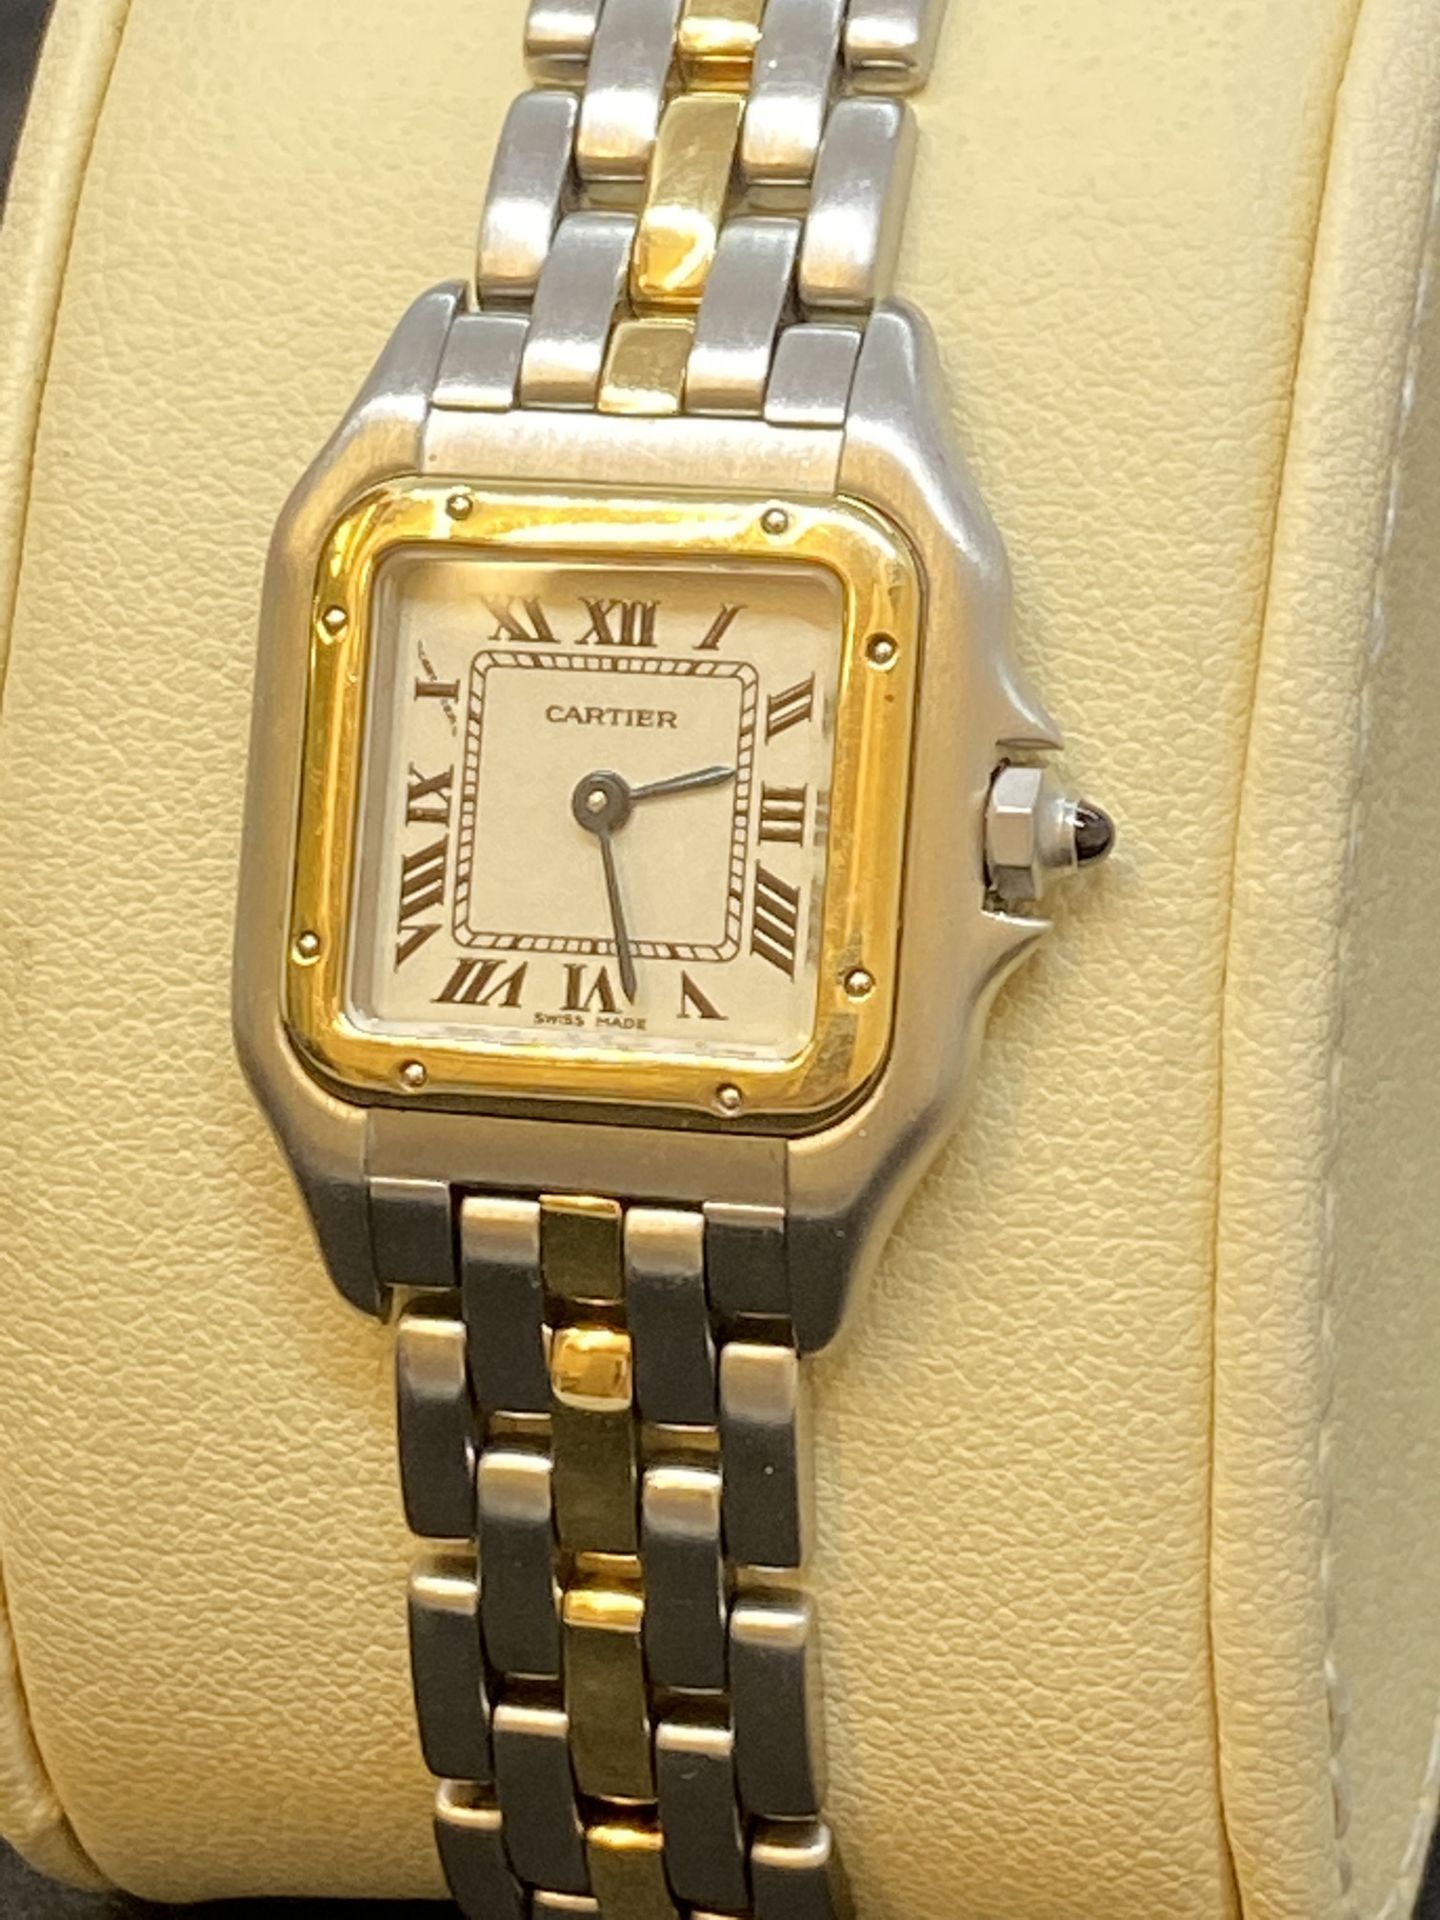 STEEL & GOLD CARTIER PANTHER WATCH - Image 4 of 10